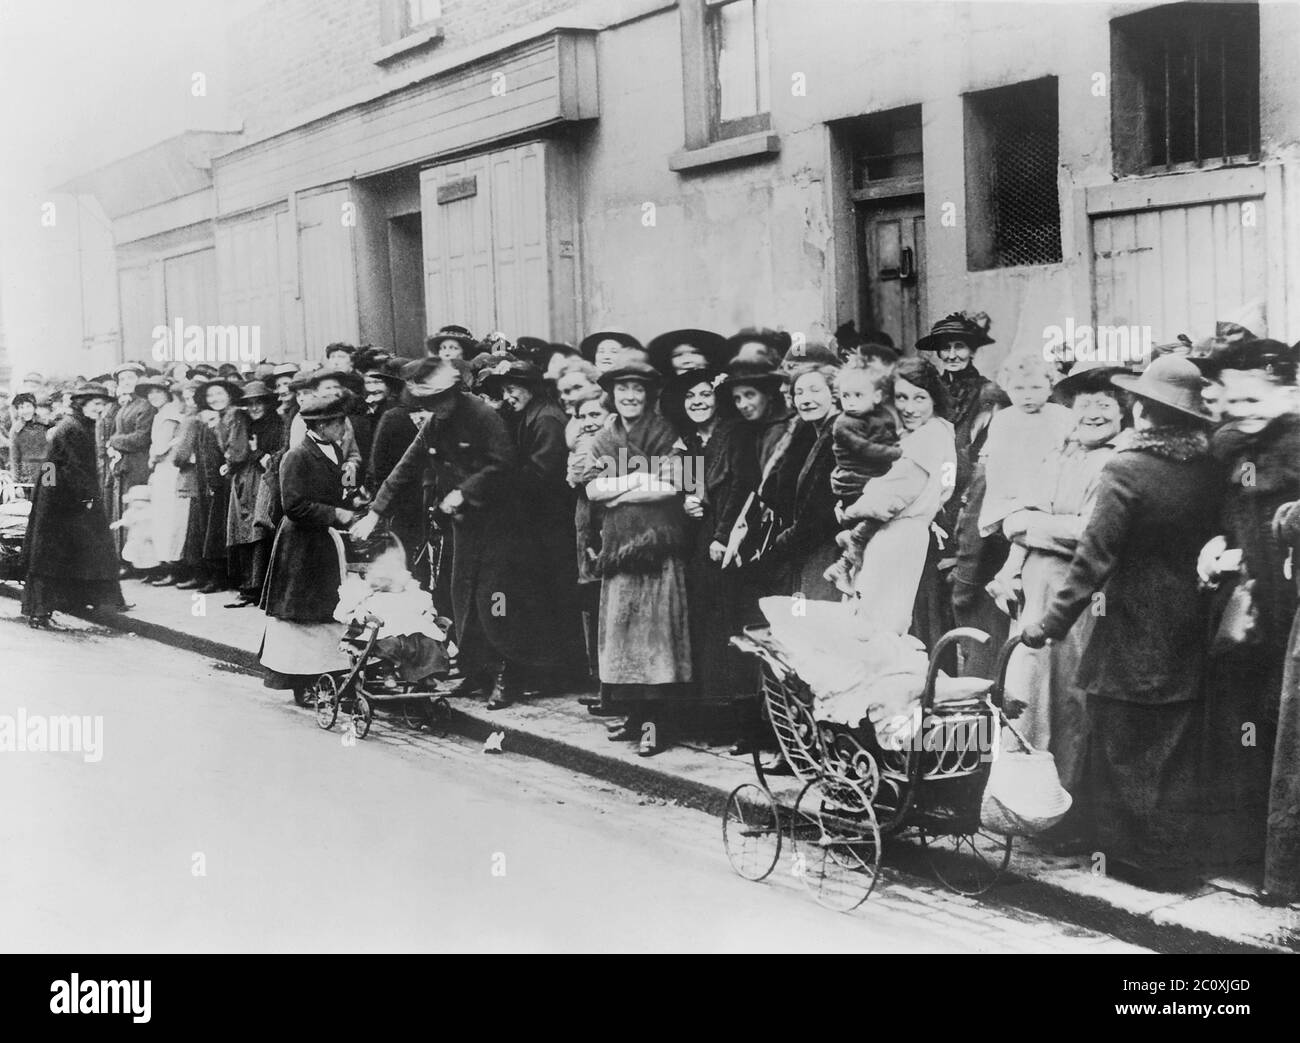 Women and Children waiting in Bread Line, England, National Photo Company Collection, 1914 Stock Photo